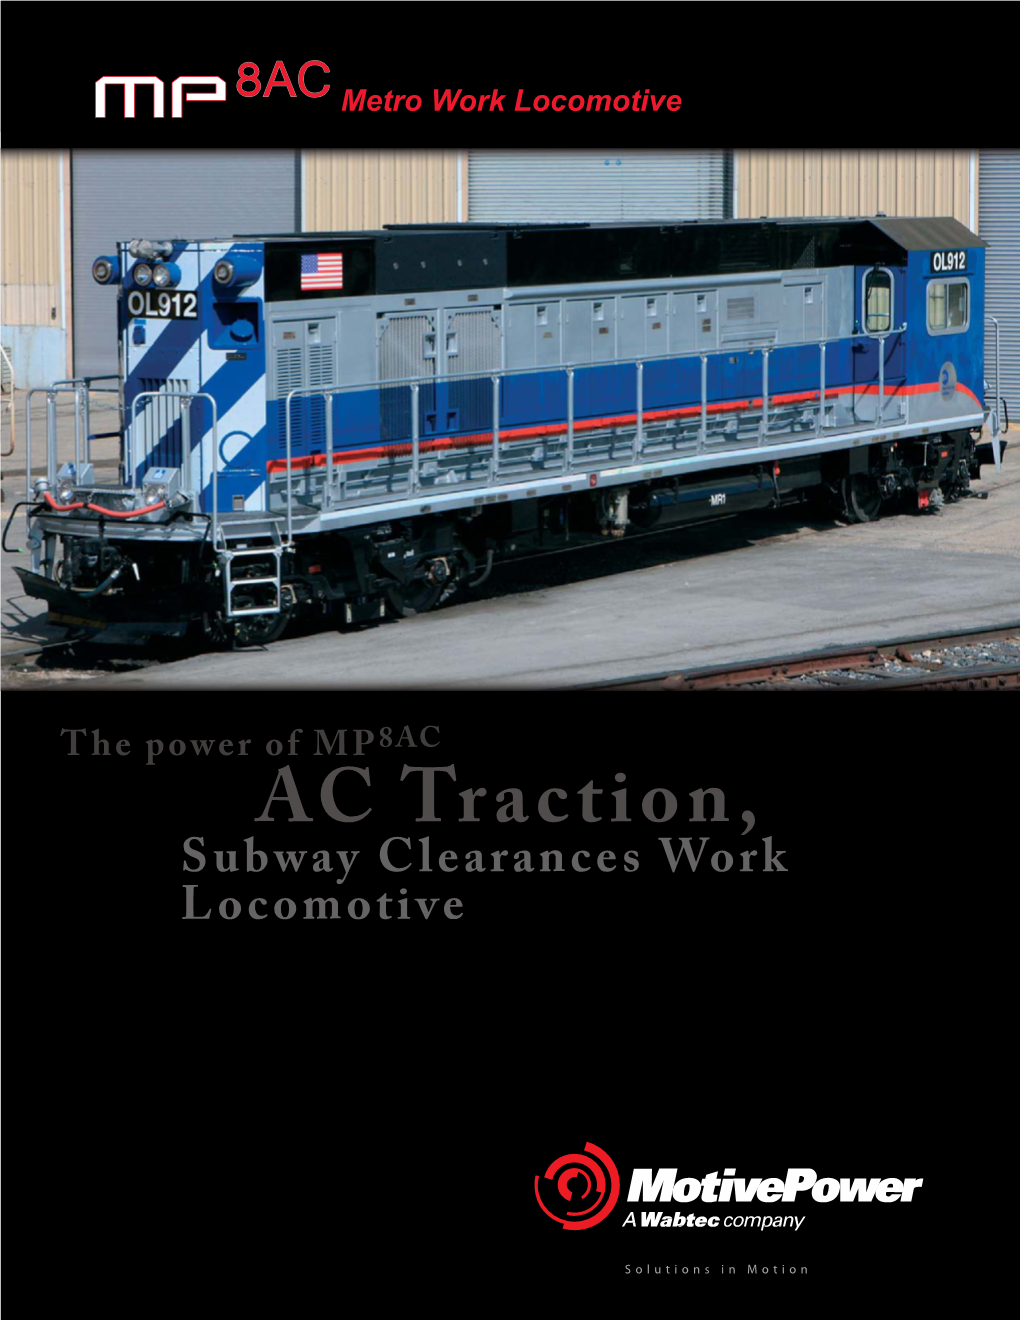 AC Traction, Subway Clearances Work Locomotive